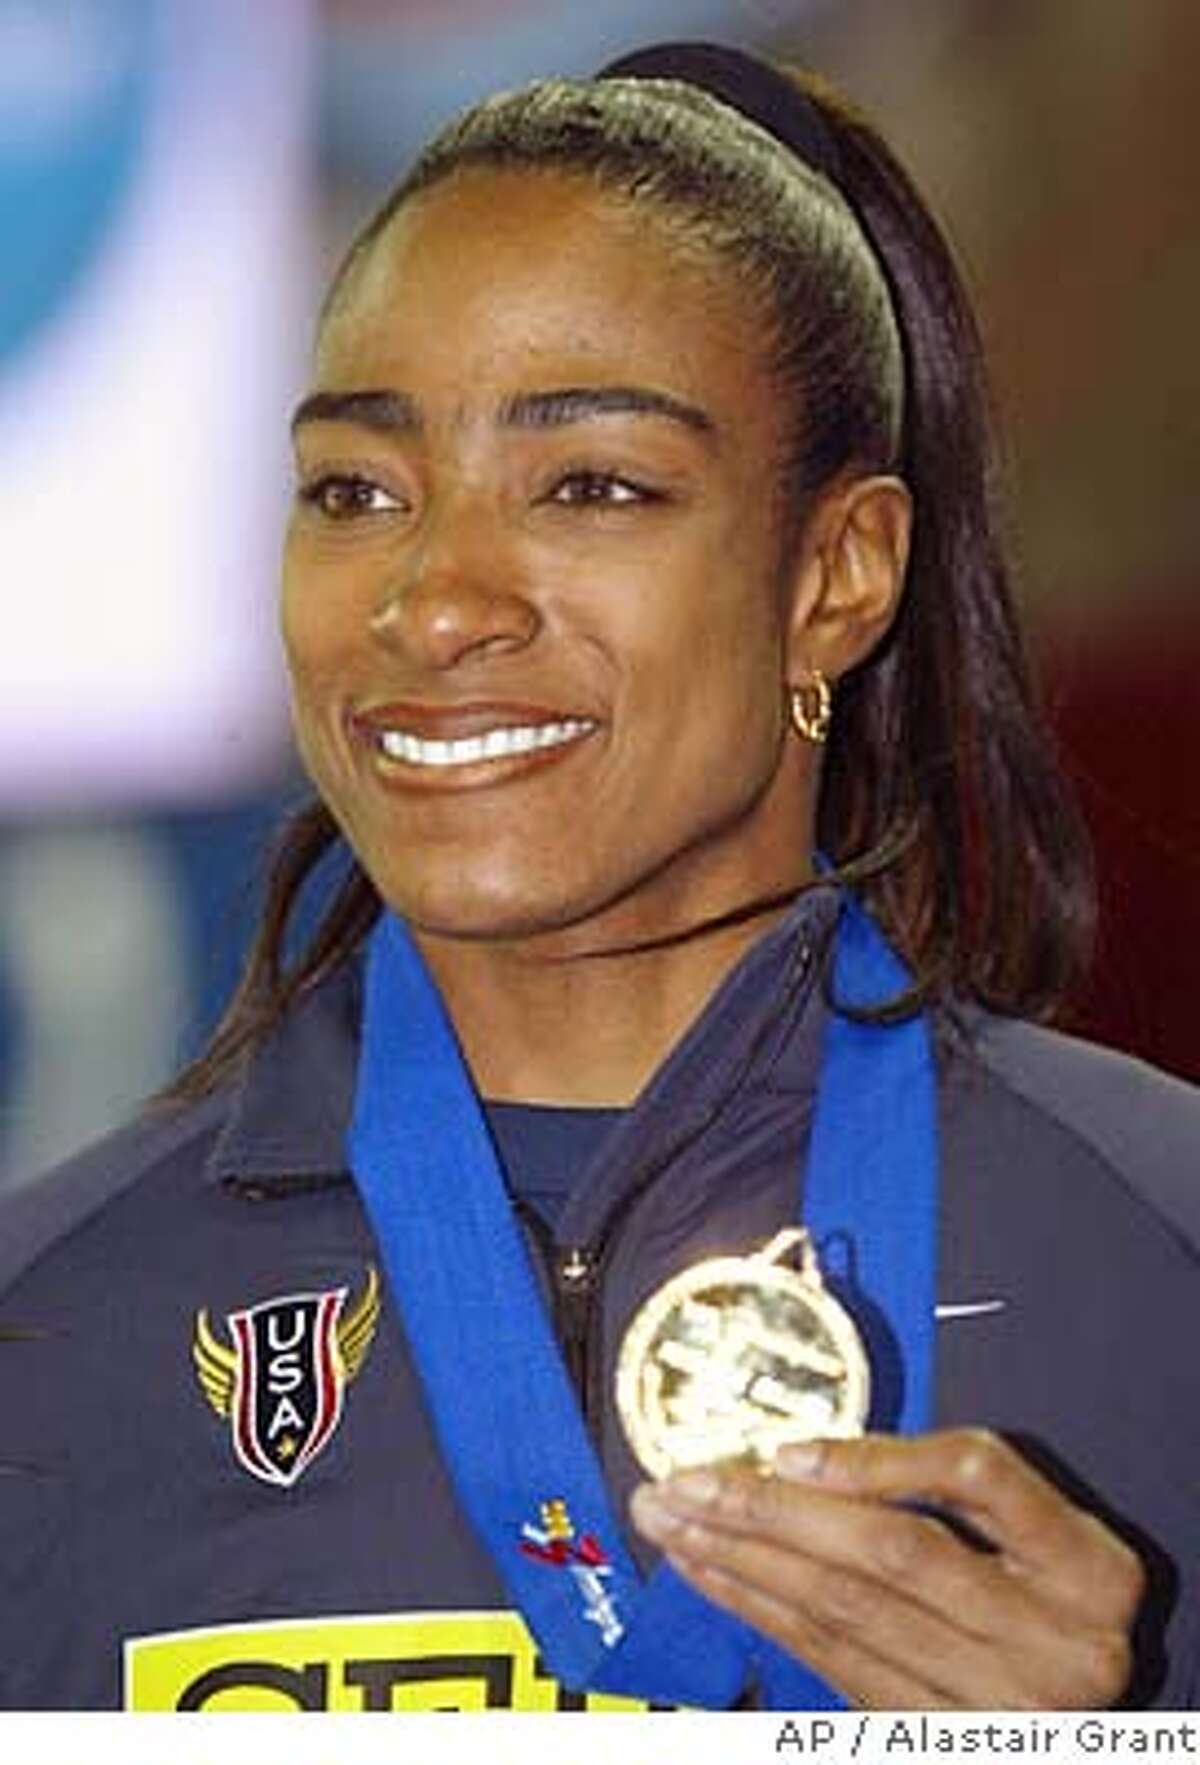 ** FILE ** Michelle Collins, of the United States, displays her gold medal that she won in the Women's 200 meters at the World Indoor Athletics Championships in Birmingham, England, Saturday, March 15, 2003. The U.S. Anti-Doping Agency has notified Collins that it will seek a lifetime ban against her for alleged drug violations, Collins' lawyer said Wednesday, June 23, 2004. (AP Photo/Alastair Grant,file) Ran on: 06-24-2004 Ran on: 06-24-2004 MARCH 15, 2003 FILE PHOTO